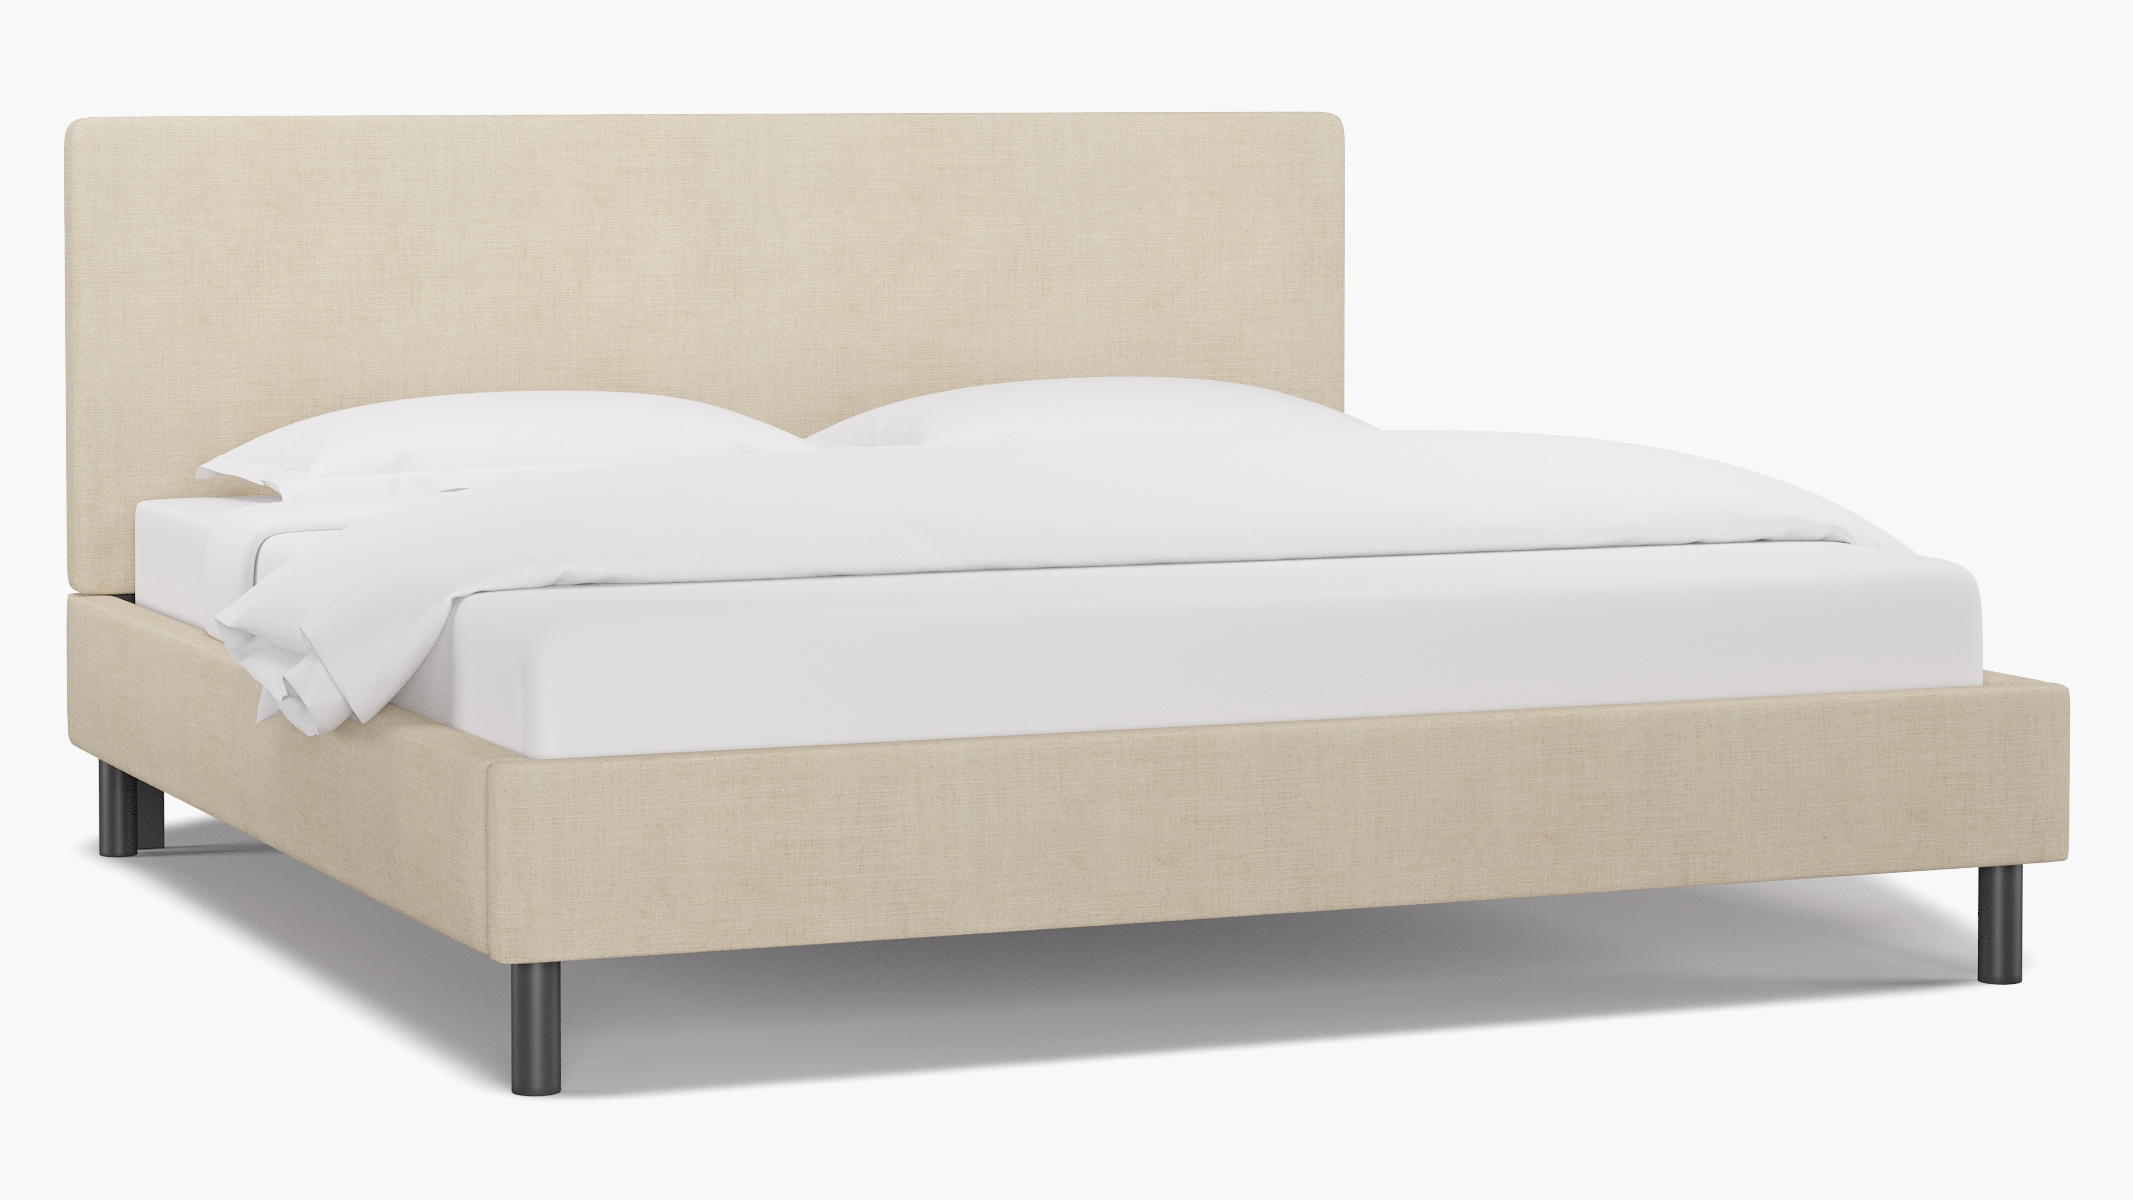 Tailored Platform Bed, Talc Everyday Linen, King - Image 1